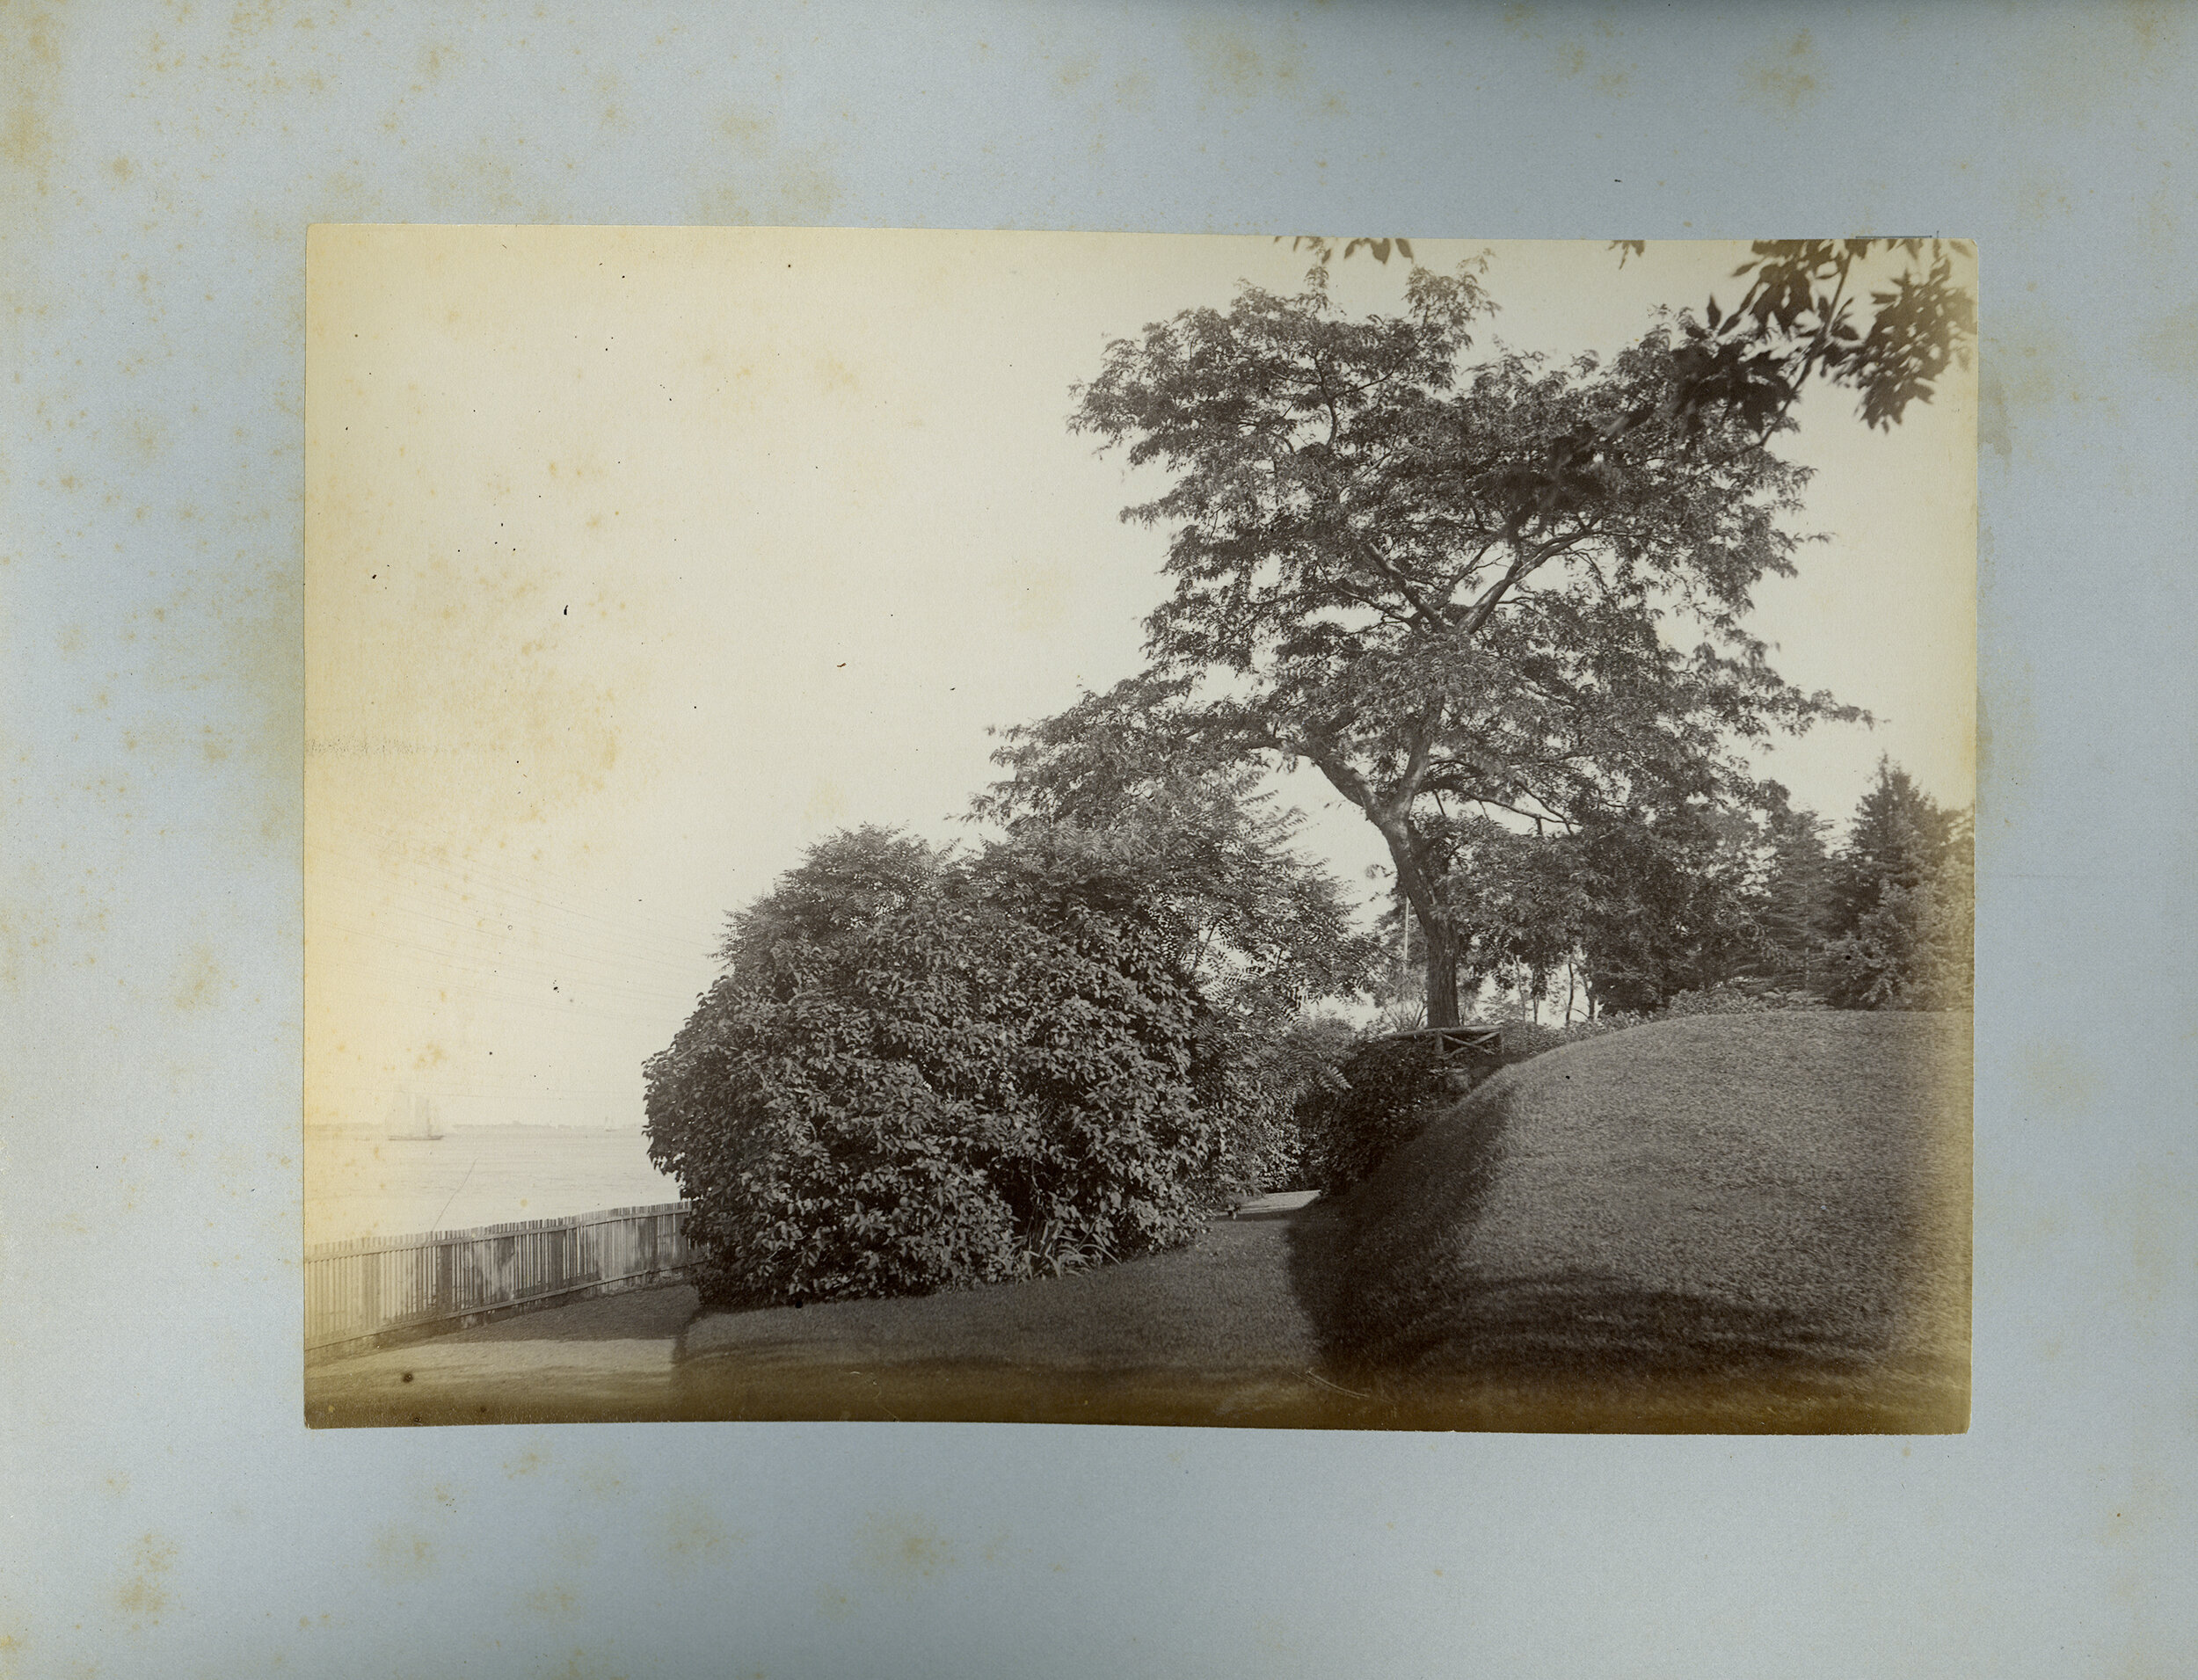   Front walk &amp; tree from gate, August 8, 1887  Collection of Historic Richmond Town, 50.015.7535.015 